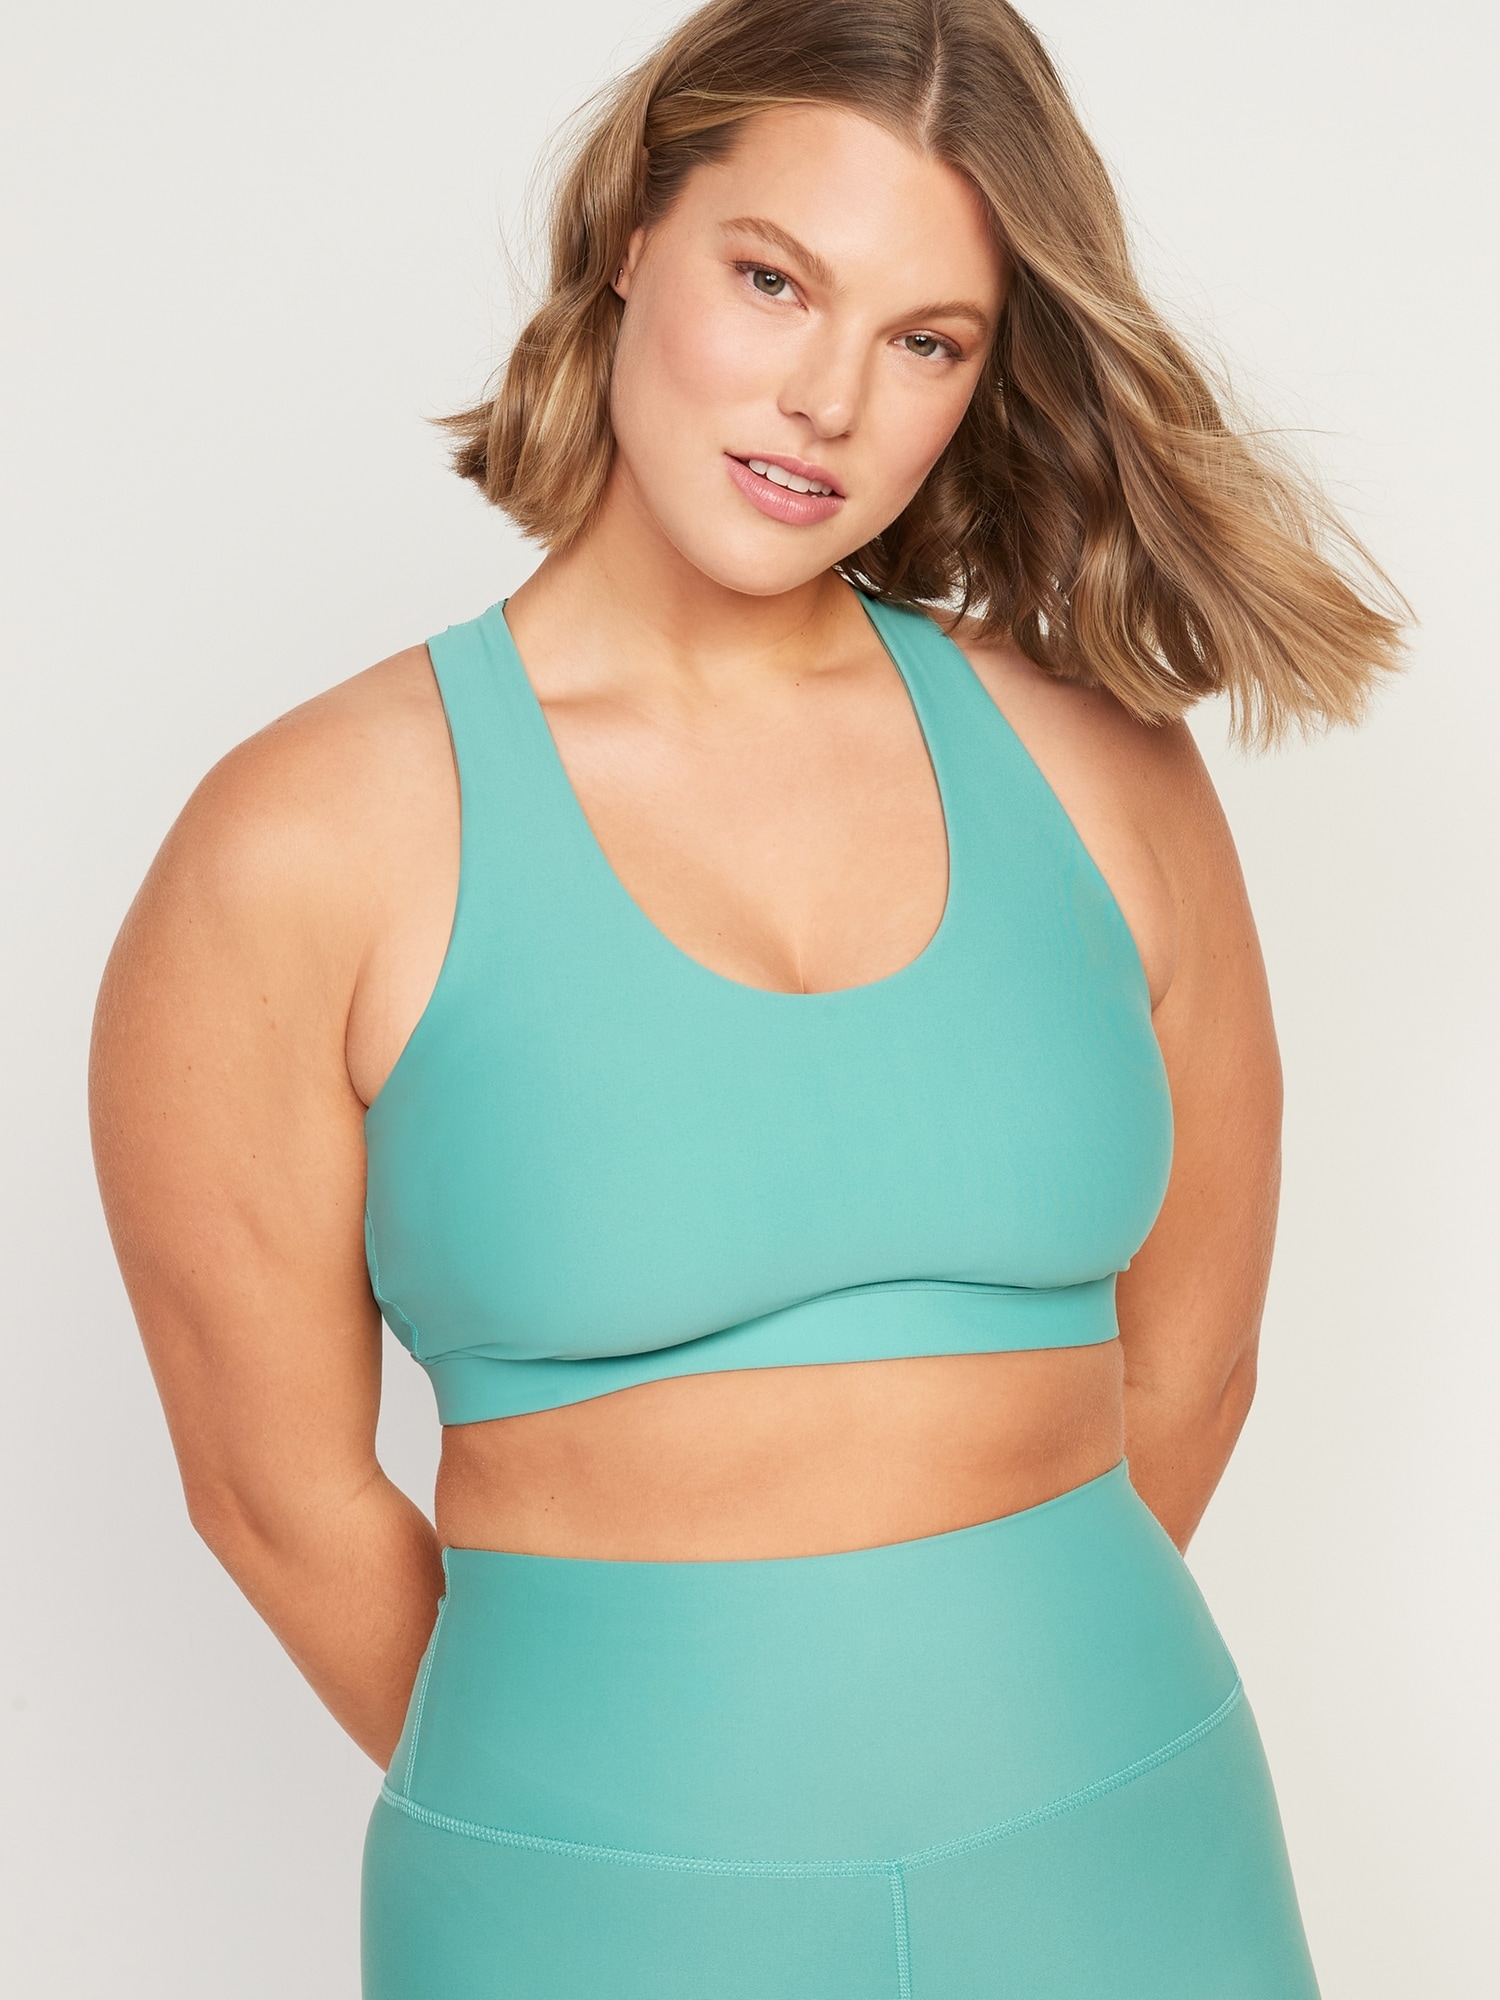 Layer 8 Maximum Support Cross back Teal Blue Size Small Bra Front Zip Sports  Bra